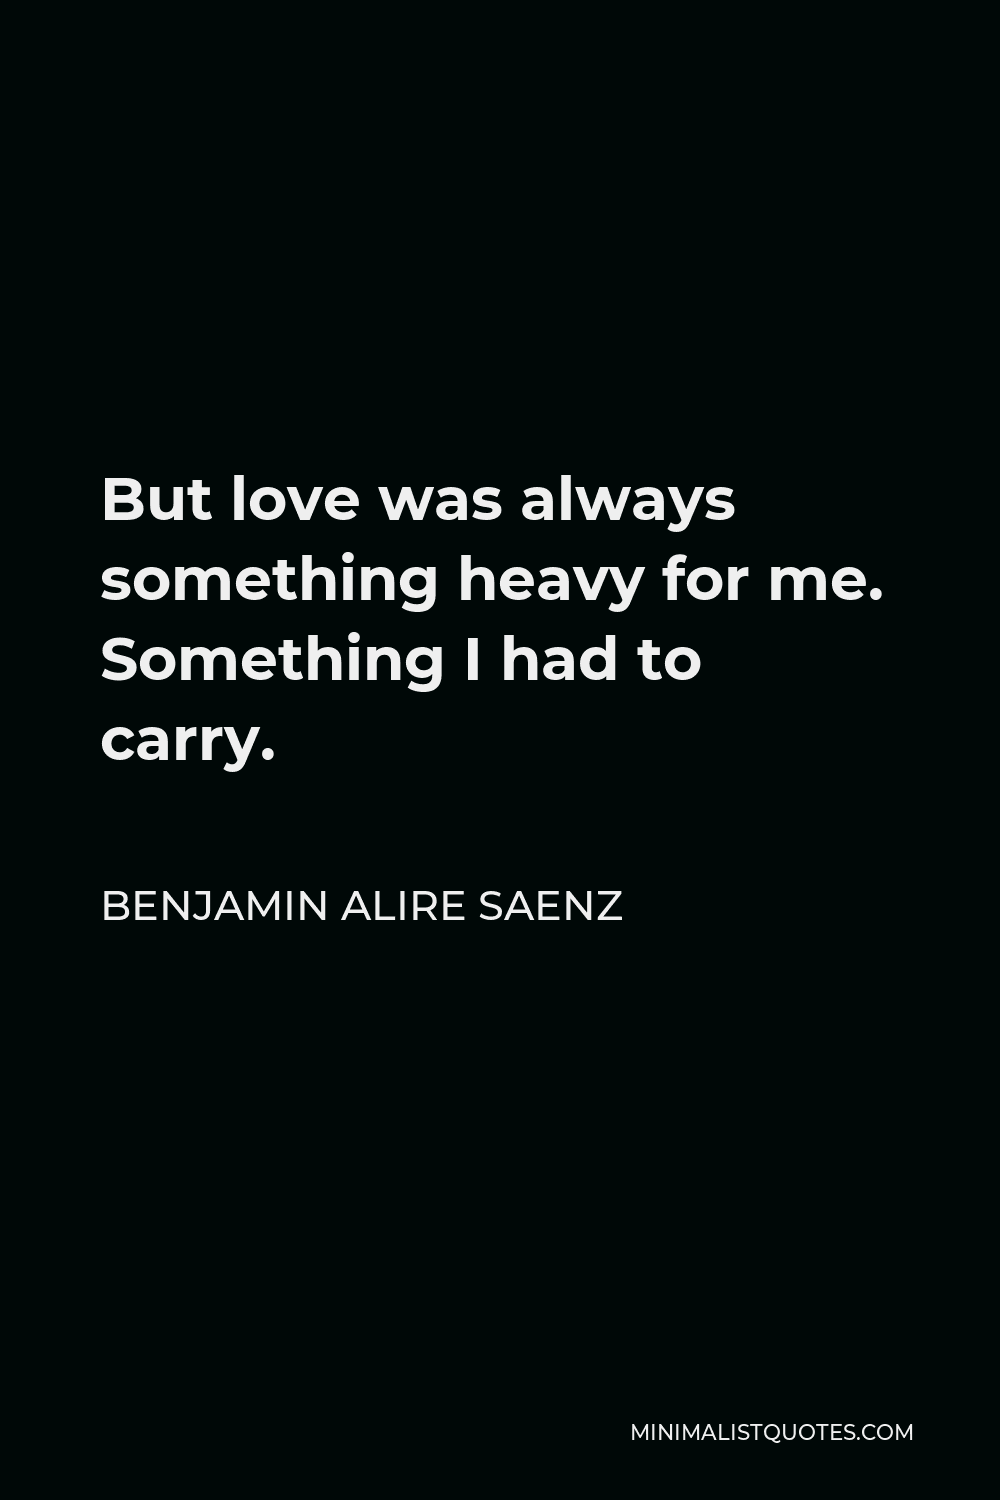 Benjamin Alire Saenz Quote - But love was always something heavy for me. Something I had to carry.